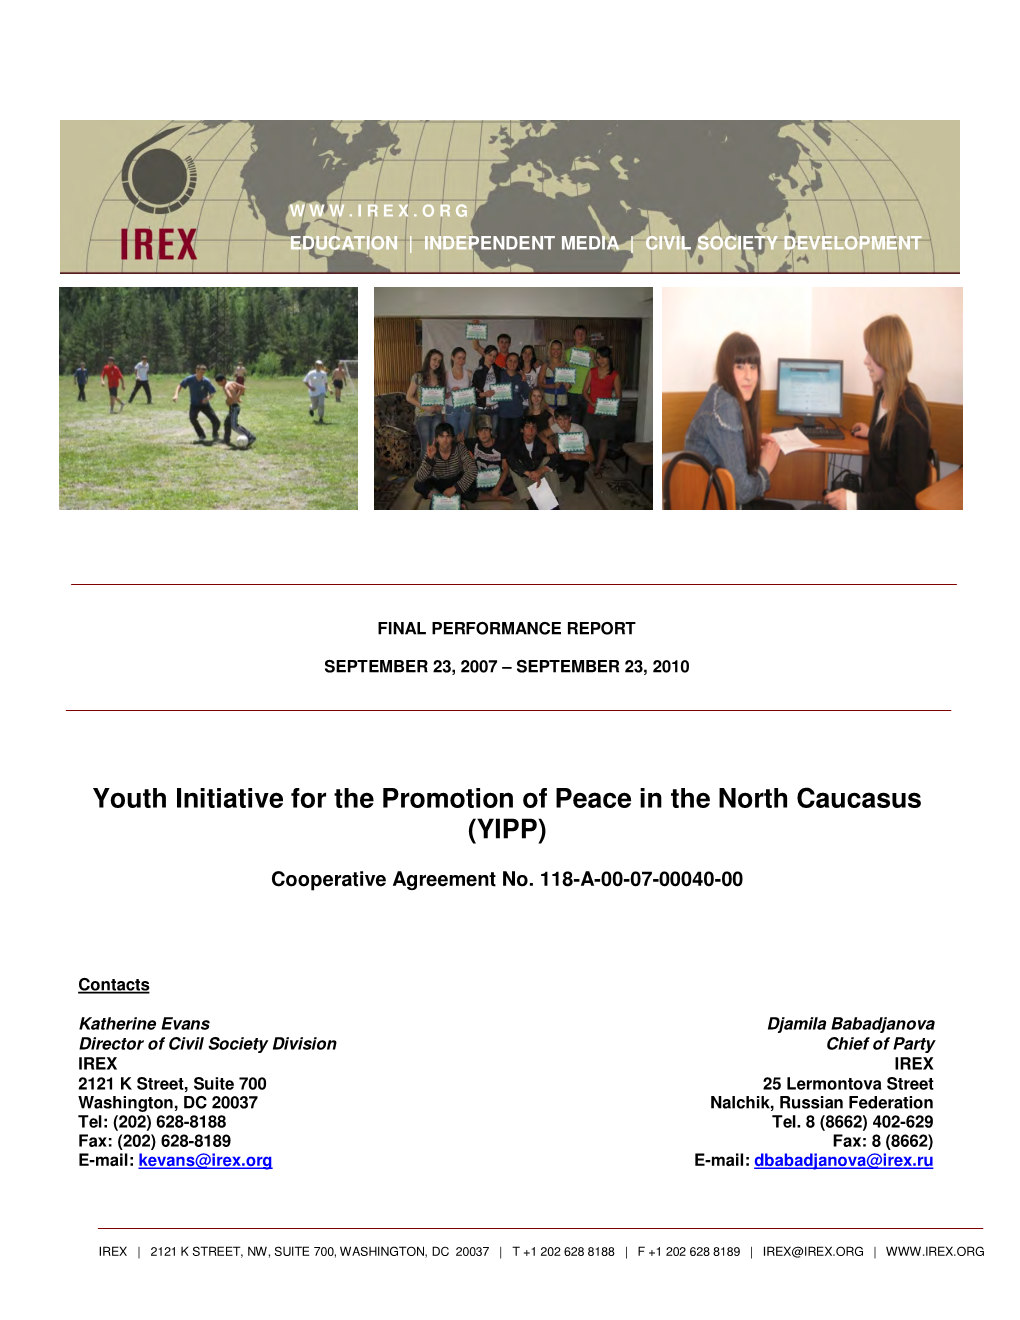 Youth Initiative for the Promotion of Peace in the North Caucasus